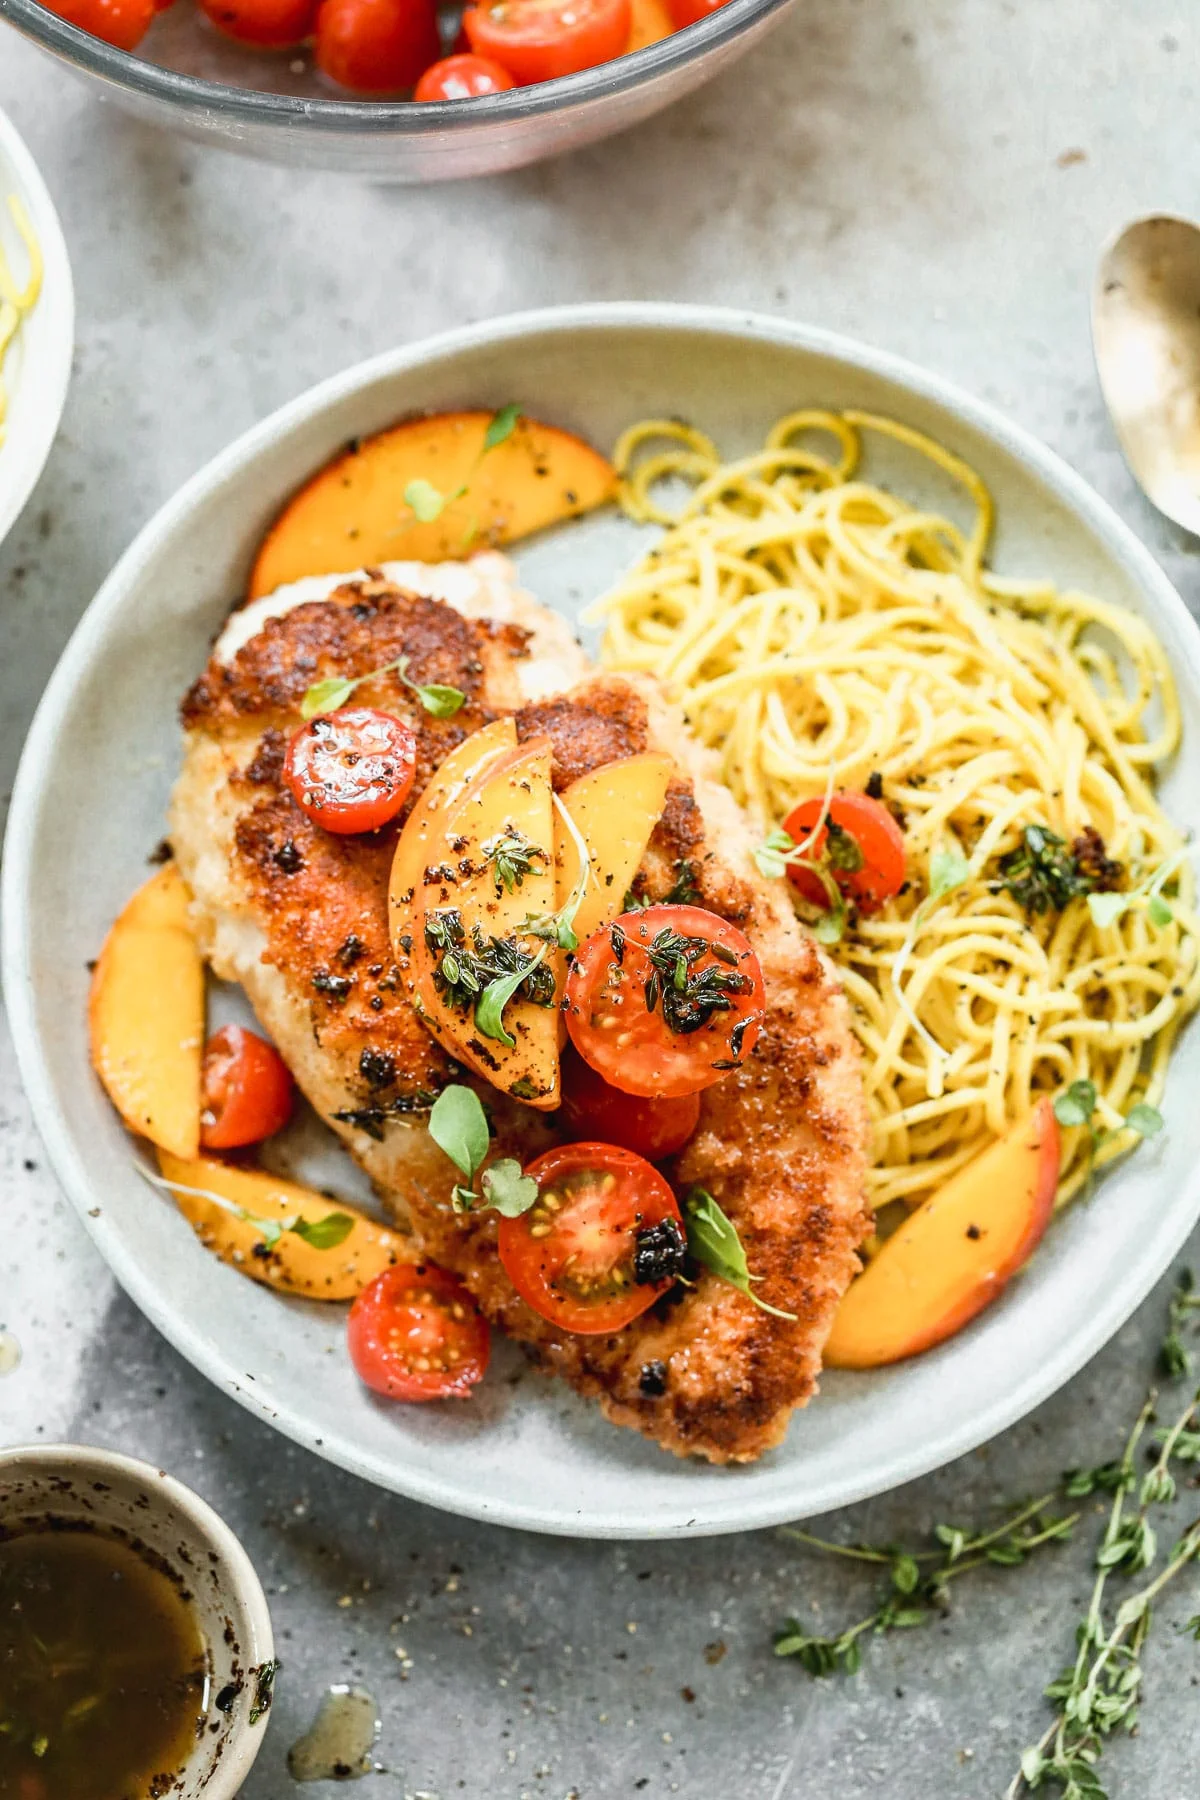 If summer were showcased on a plate it would surely be in the form of our Mozzarella-Stuffed Peach Chicken. This ultra crispy on the exterior, cheesy and tender on the interior winner of a chicken dish is adorned with the sweetest peaches and tomatoes and then drizzled with an intoxicating combination of brown butter, thyme, and lemon.&nbsp;You don't want to miss it!